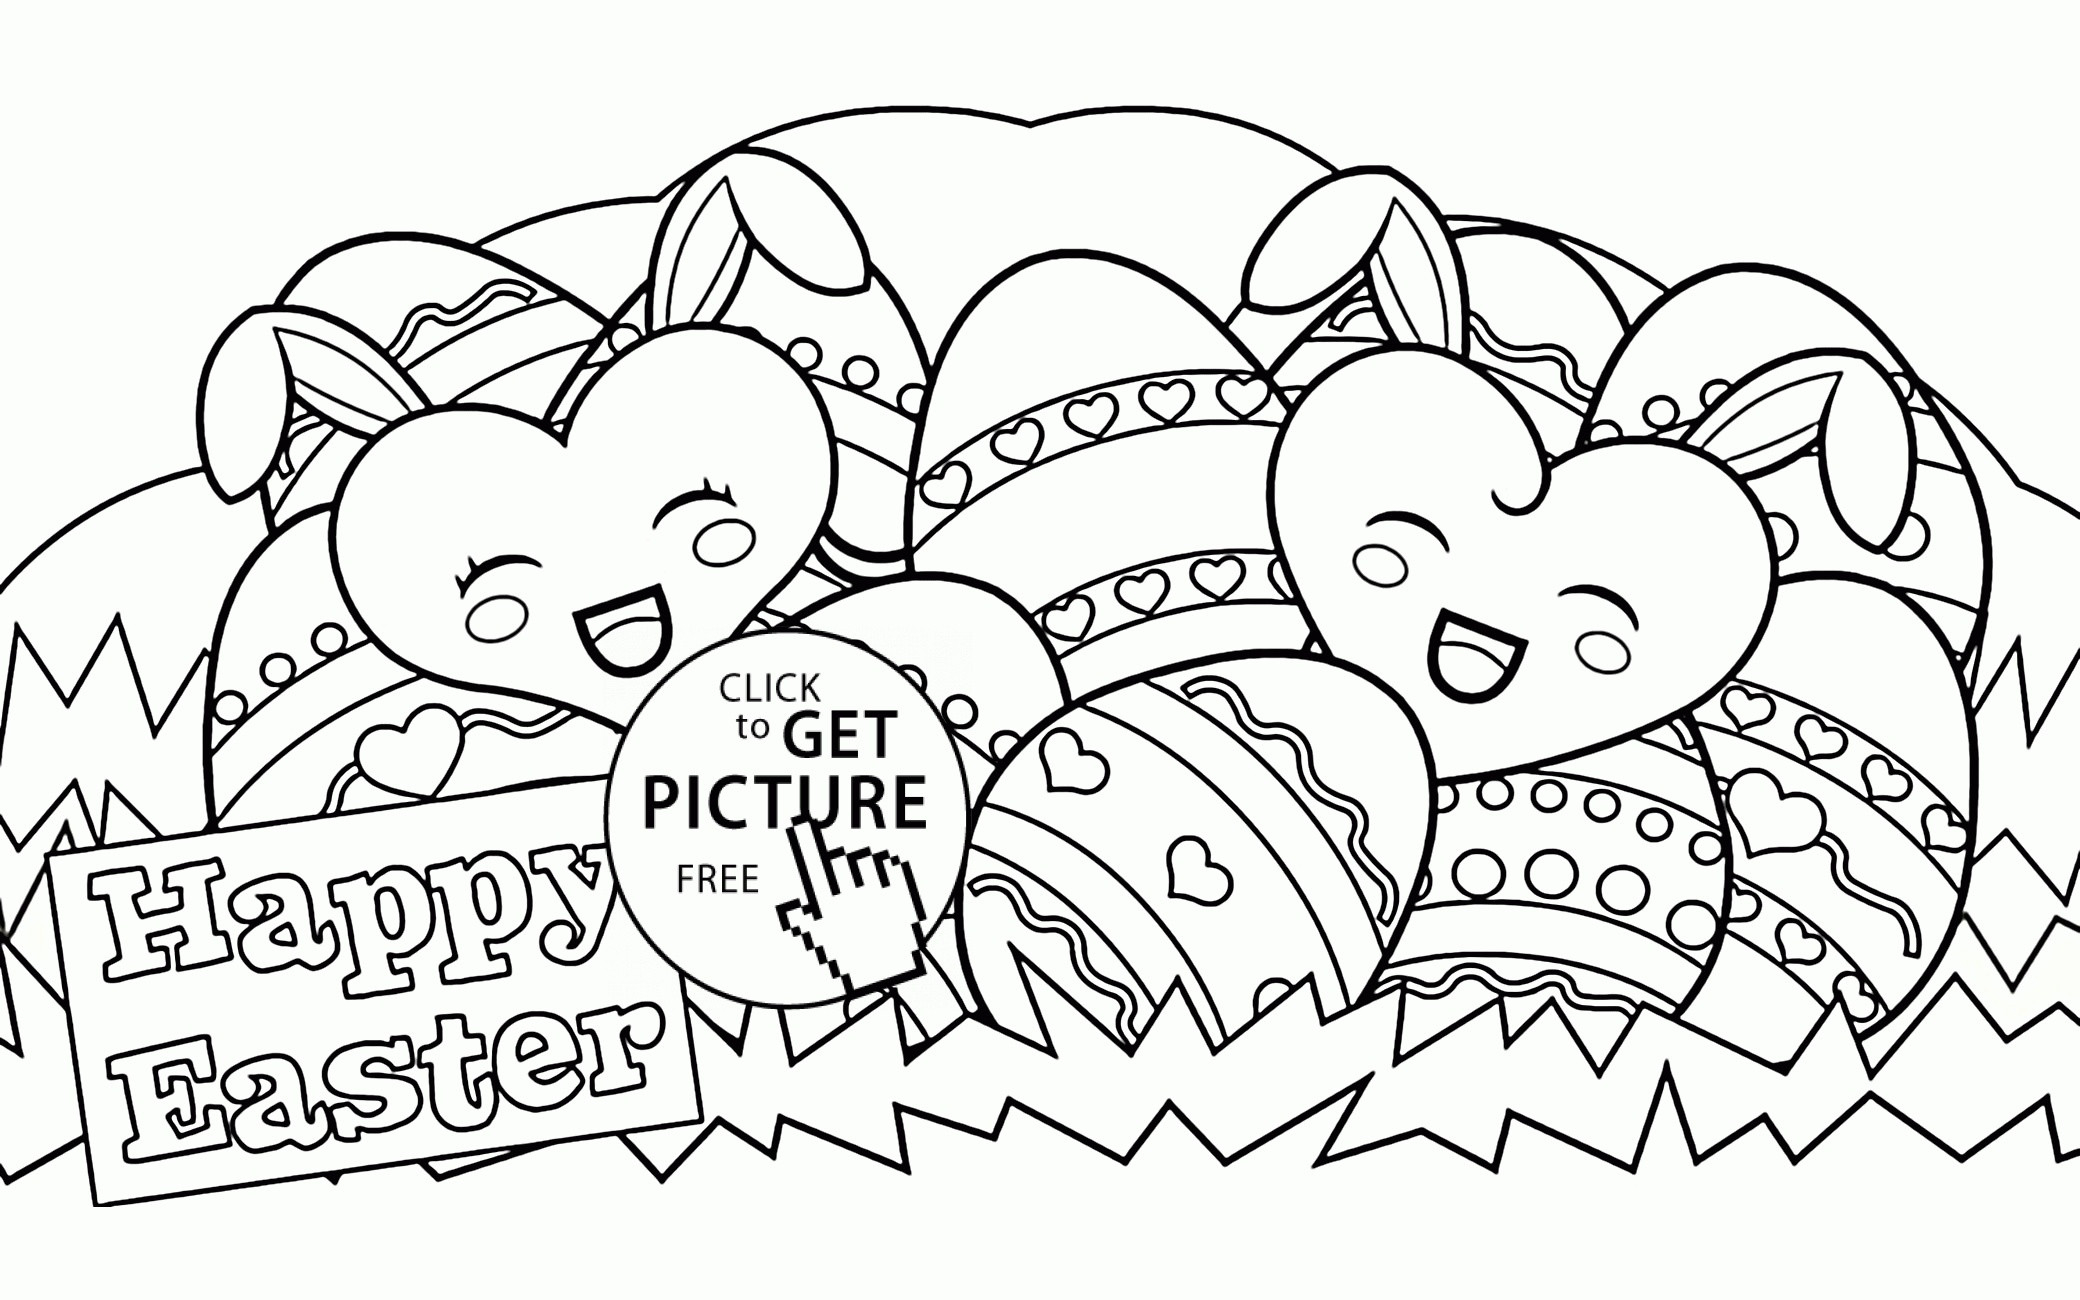 Coloring Pages For Adults Easter Free Adult Easter Coloring Pages Collection 4 O With Easter Coloring